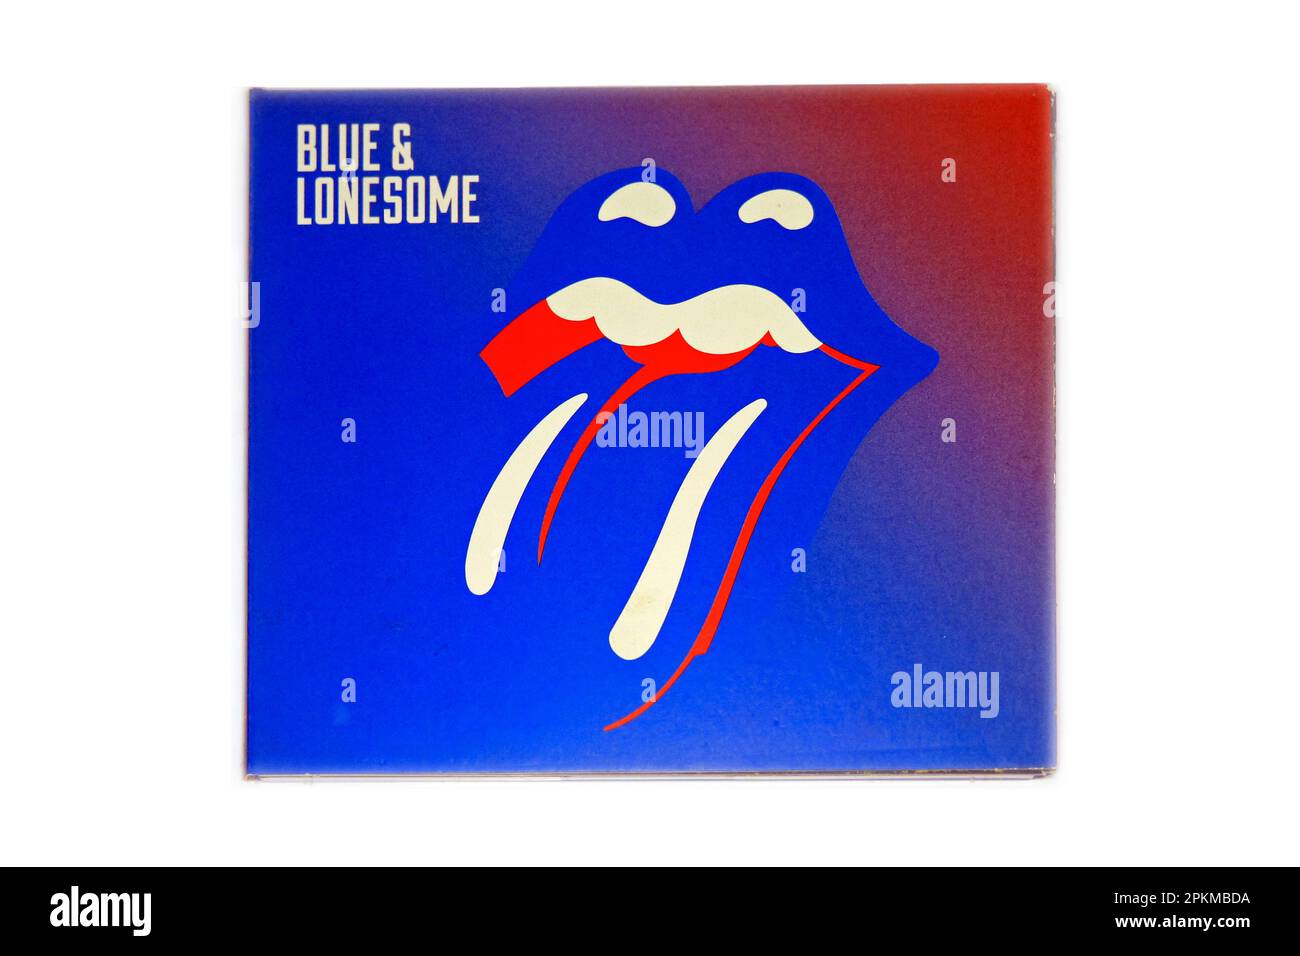 Blue & Lonesome - Rolling Stones card Music CD cover. cym Stock Photo -  Alamy